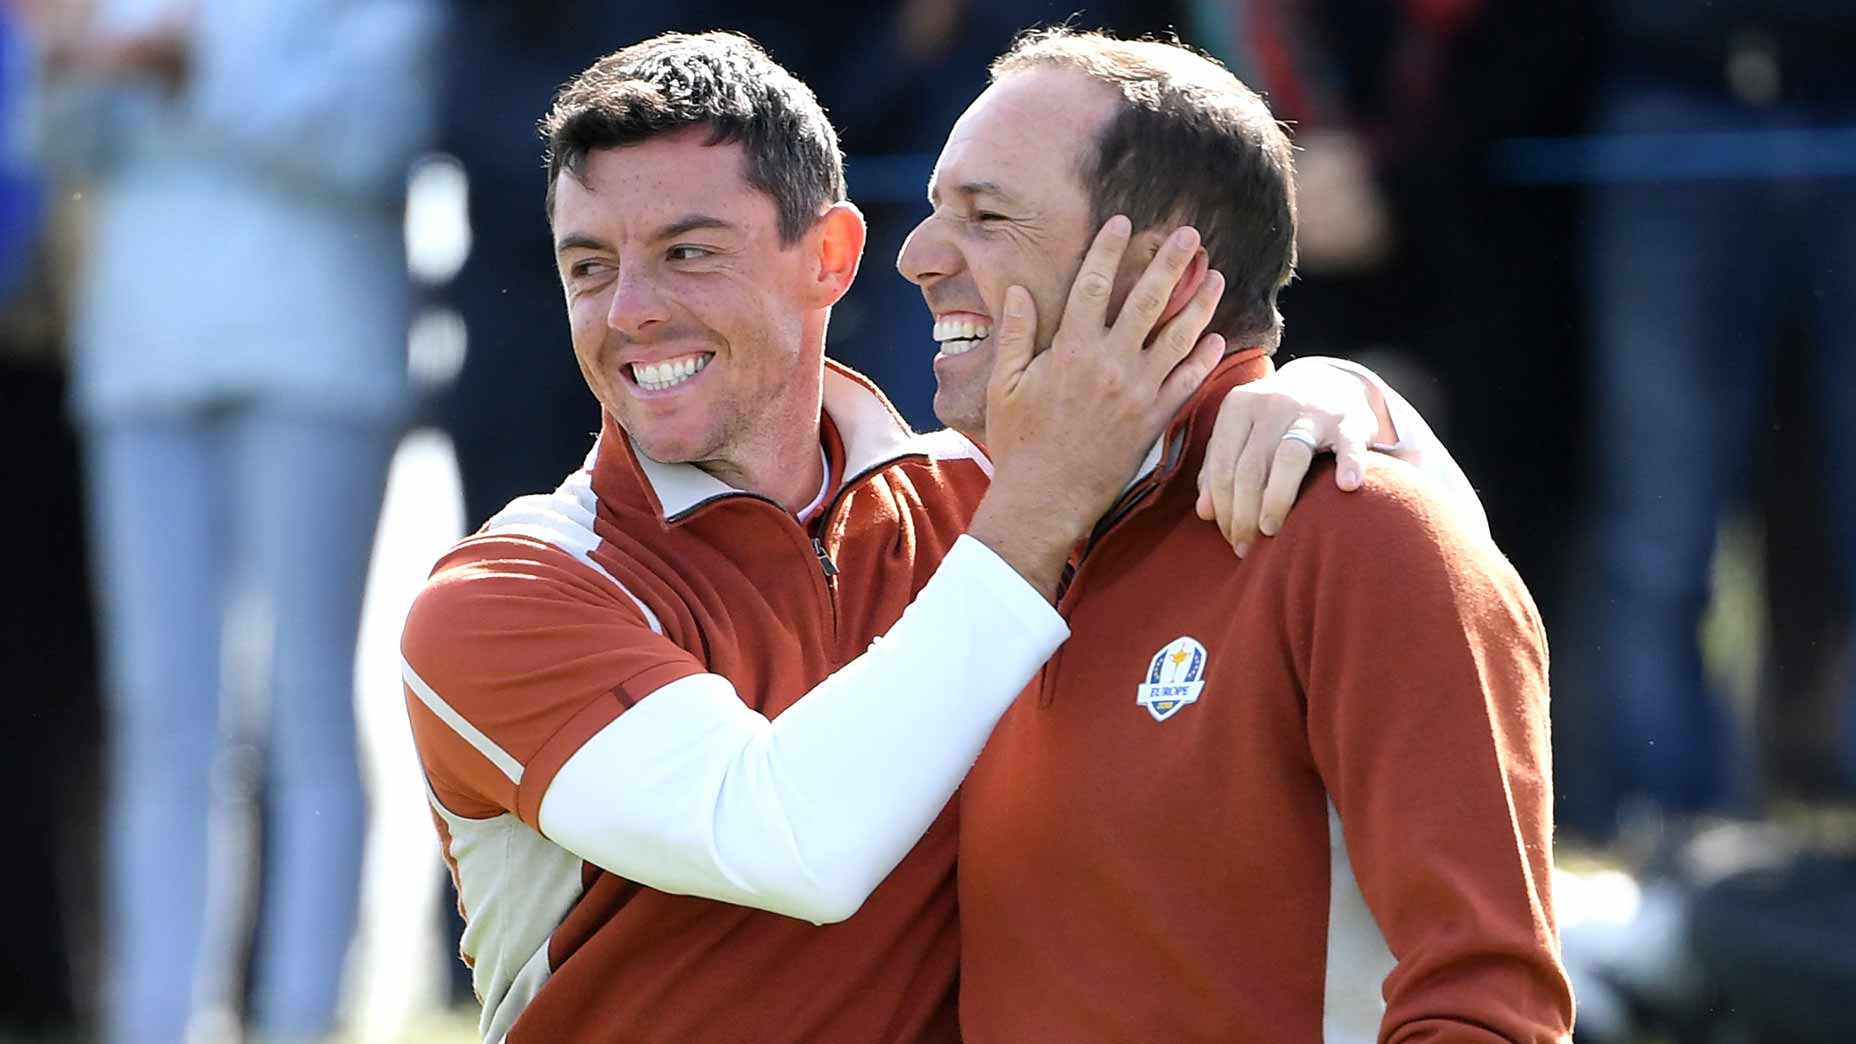 Rory McIlroy and Sergio Garcia played together at the 2018 Ryder Cup, approximately one million golfing years ago.